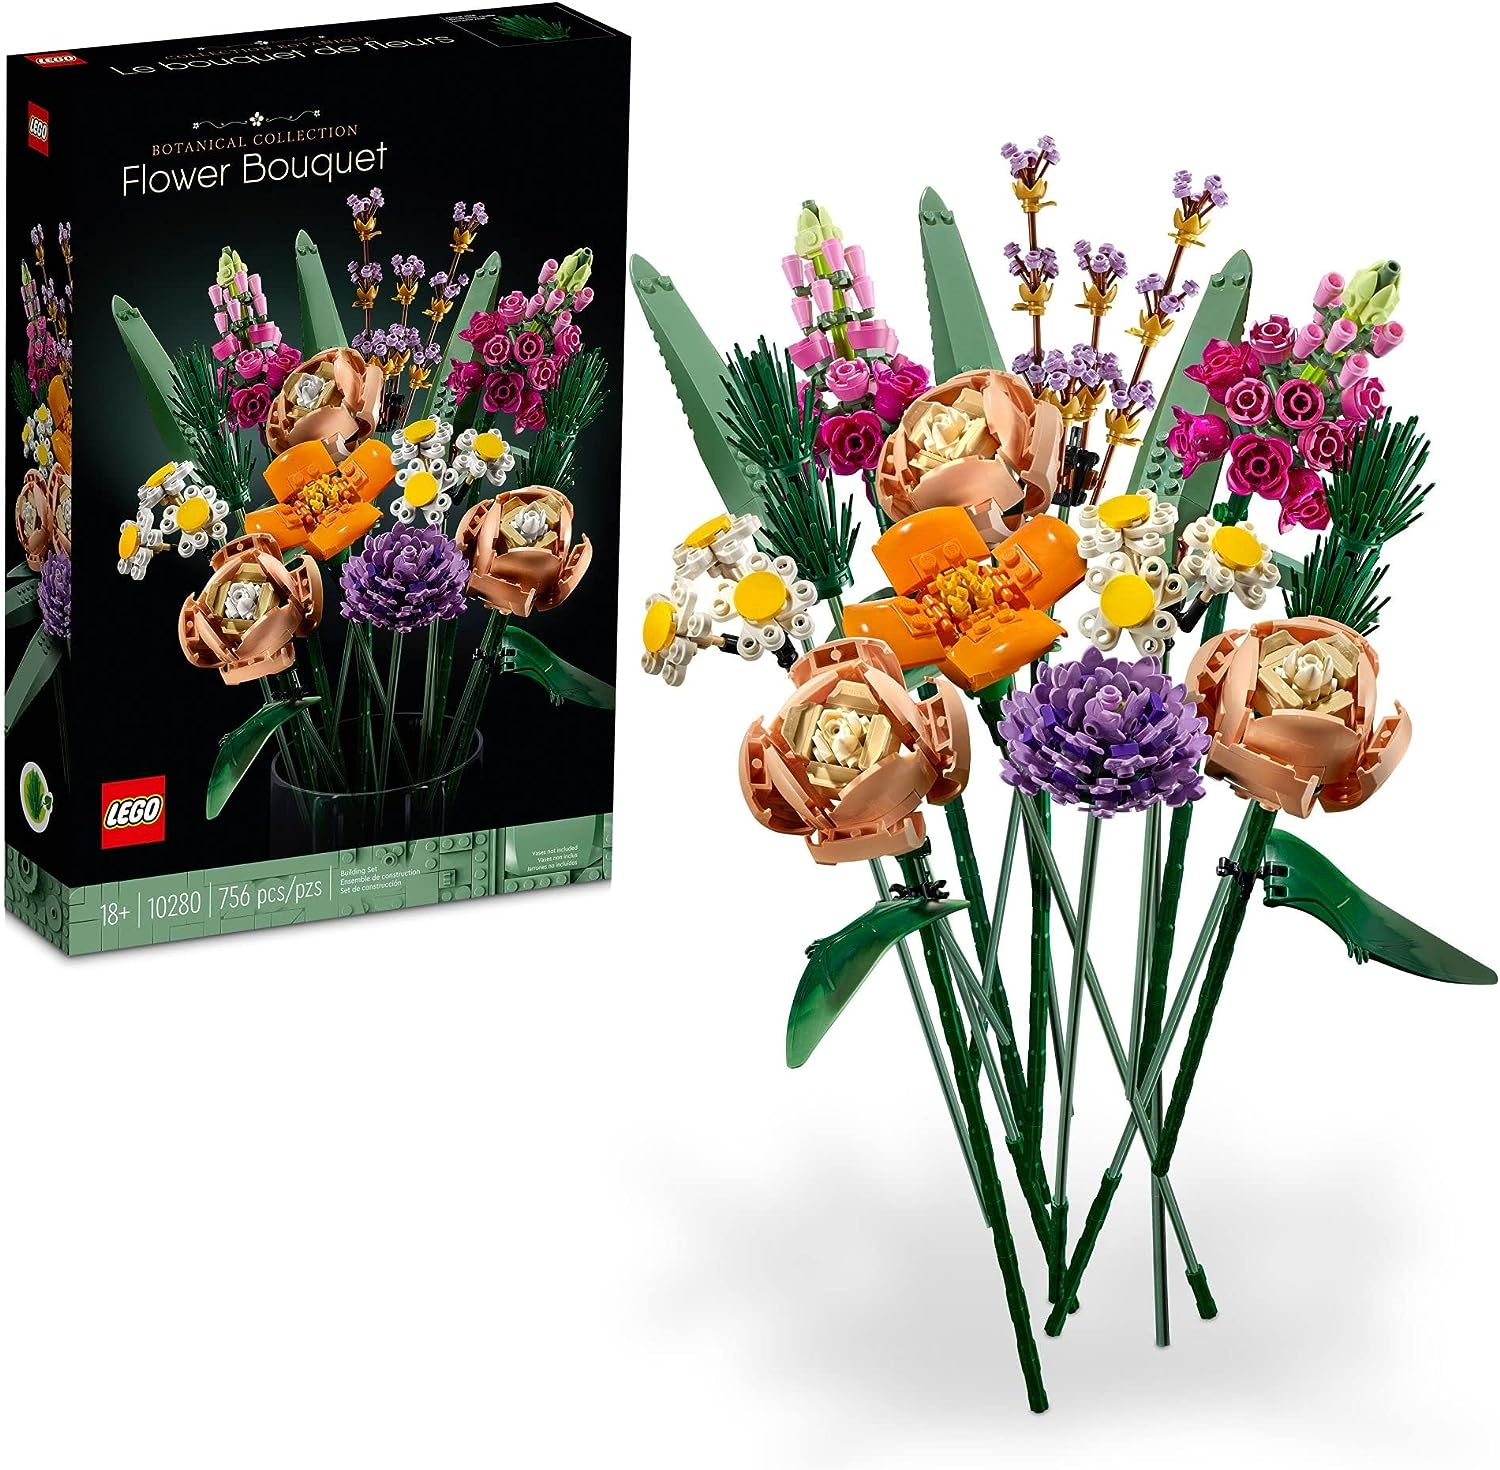 LEGO Icons Flower Bouquet Building Decoration Set - Artificial Flowers with Roses, Home Accessories or Valentine Décor for Him and Her, Gift for Valentines Day, Botanical Collection for Adults, 10280